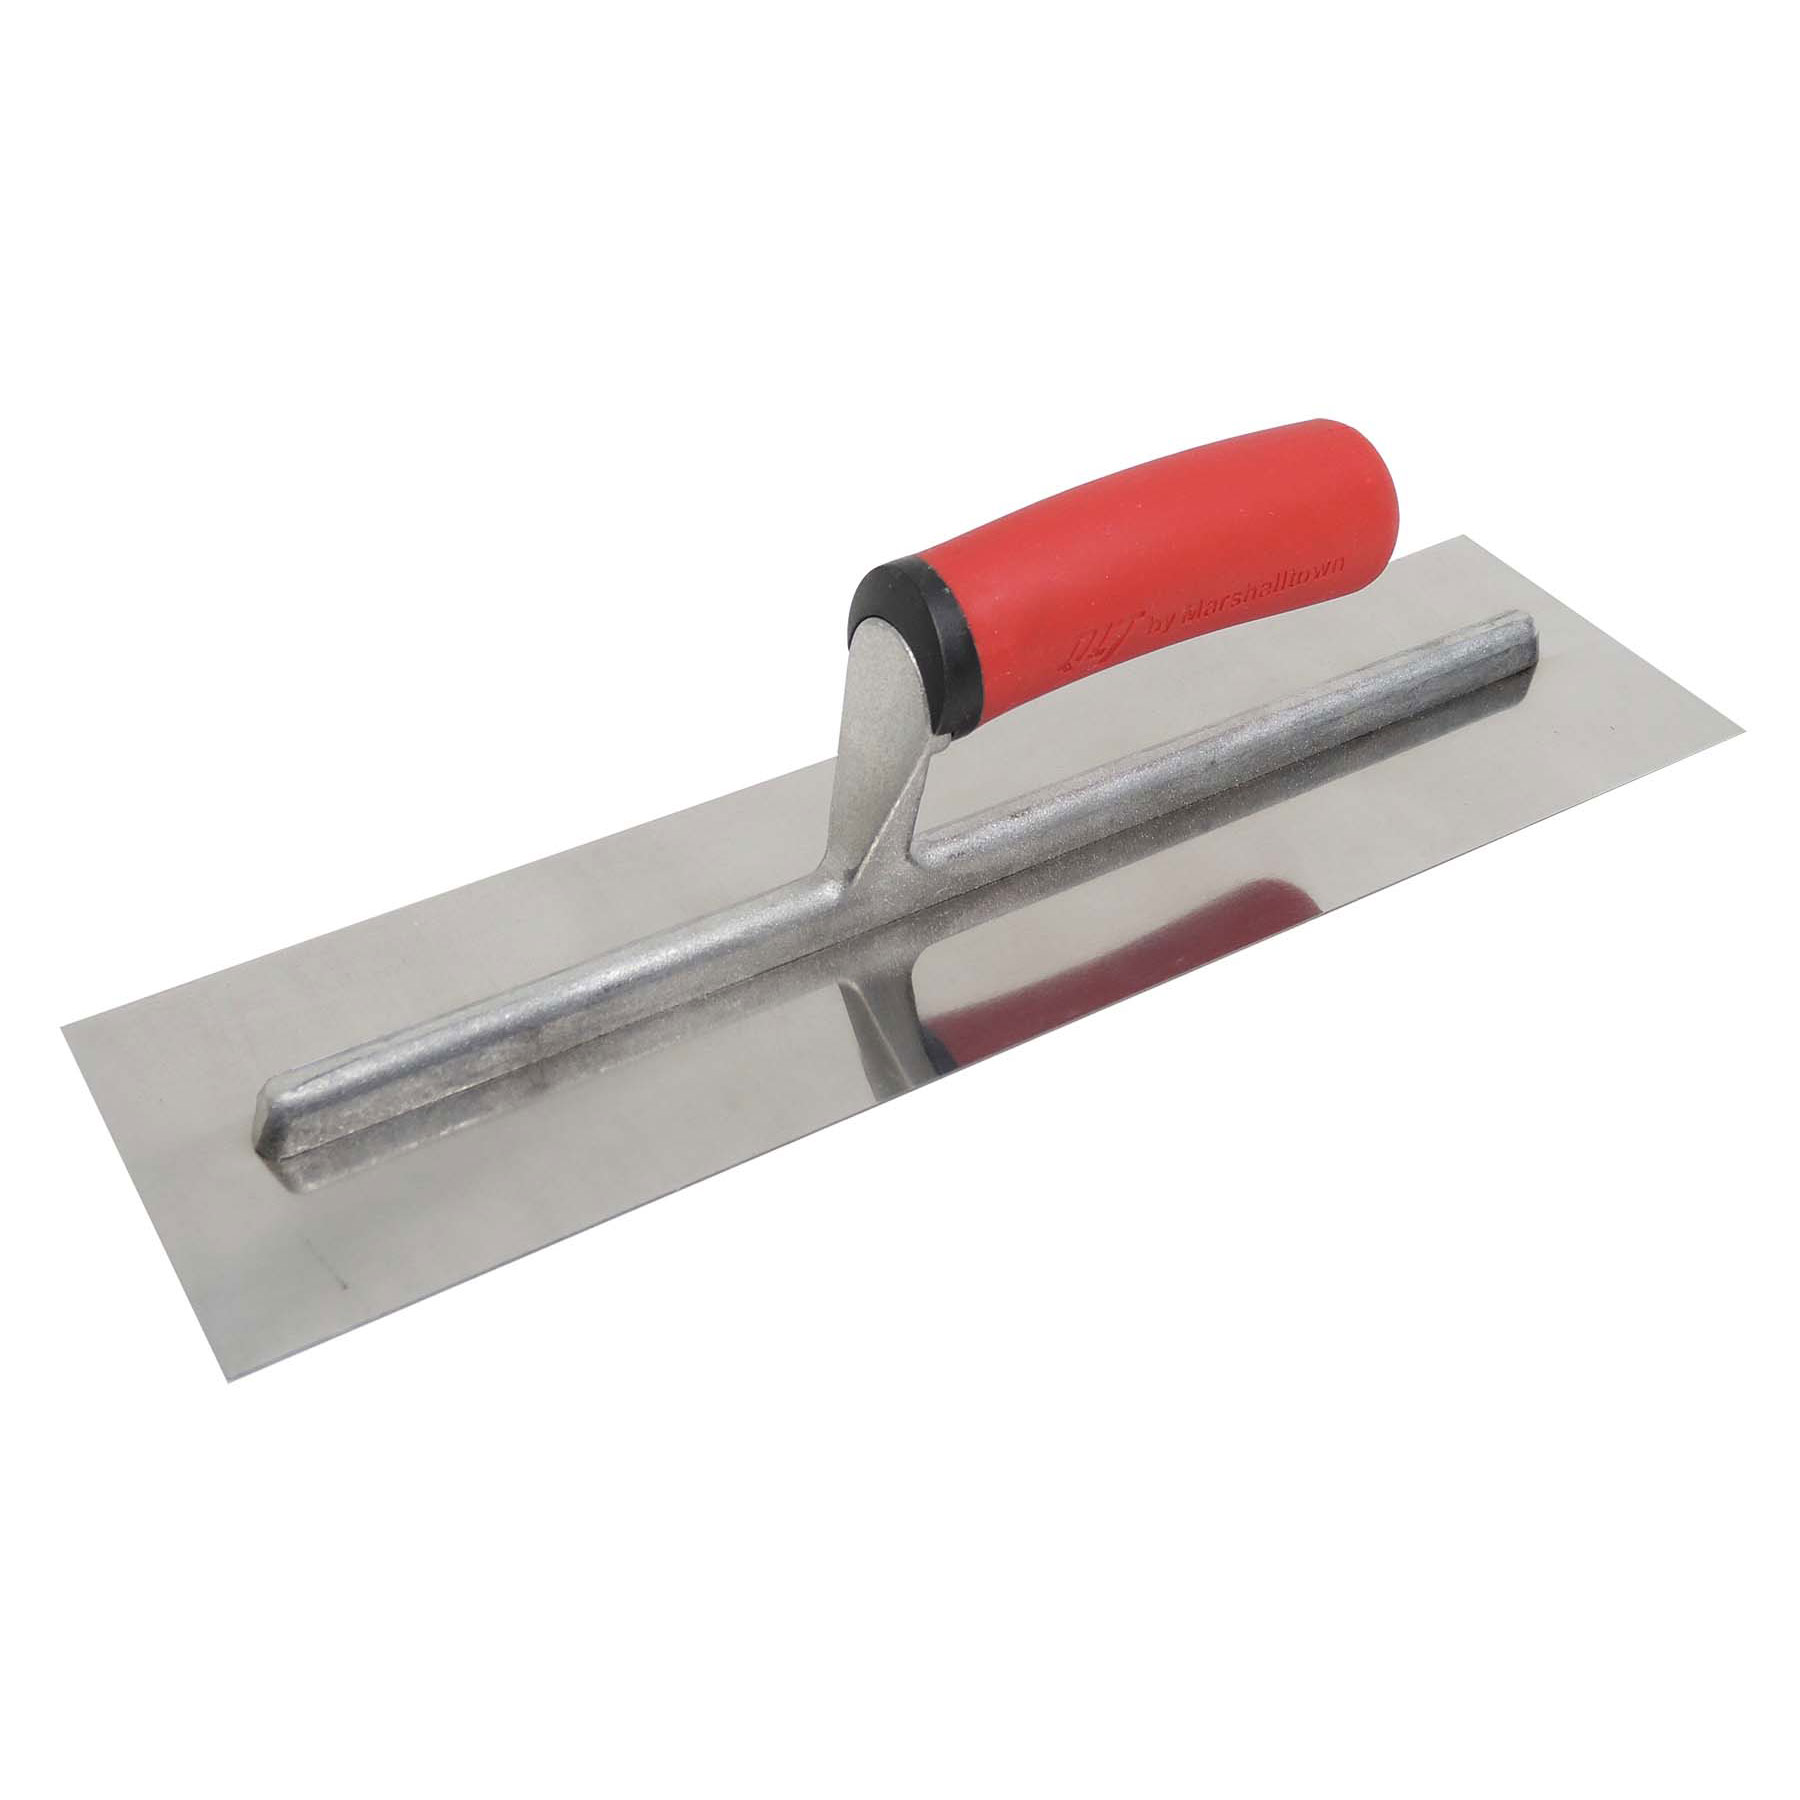 Marshalltown FT144SS 14in x 4in Stainless Finishing Trowel with Soft Grip FT144SS